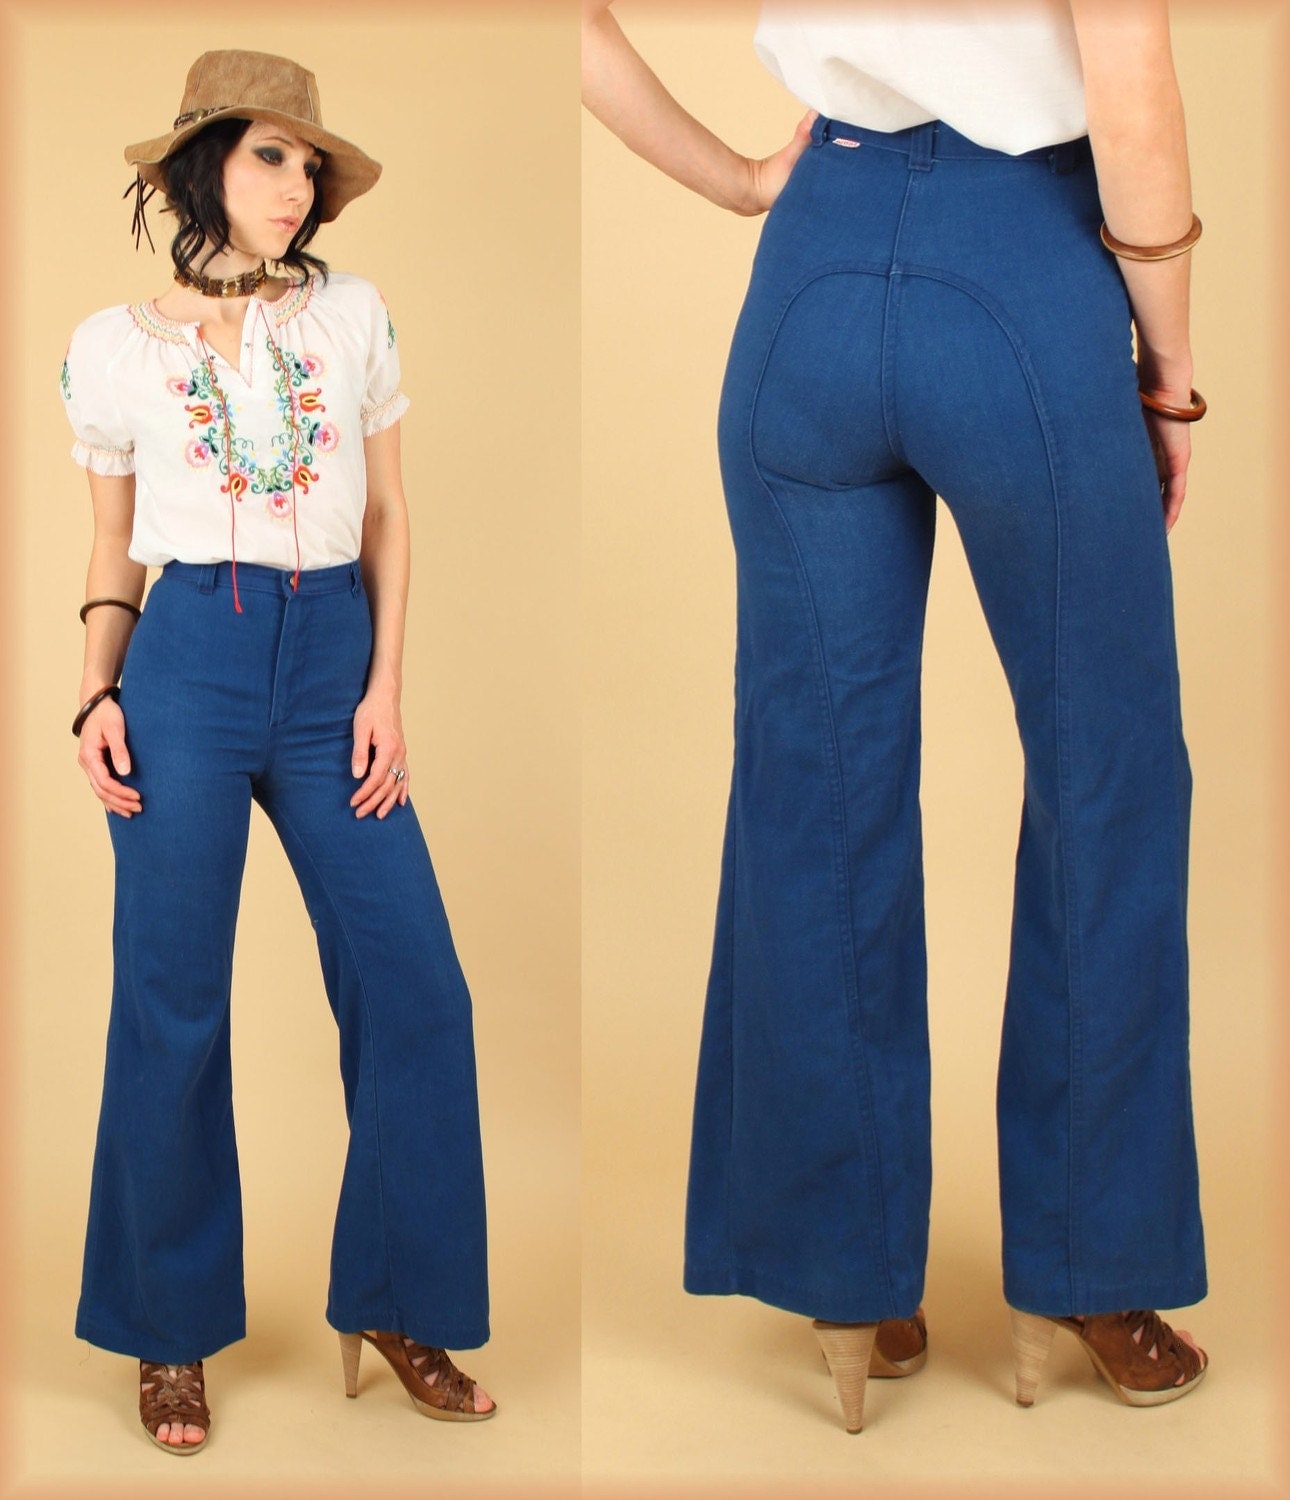 ViNtAgE 70's DITTO Blue High Waisted Bell Bottom Jeans